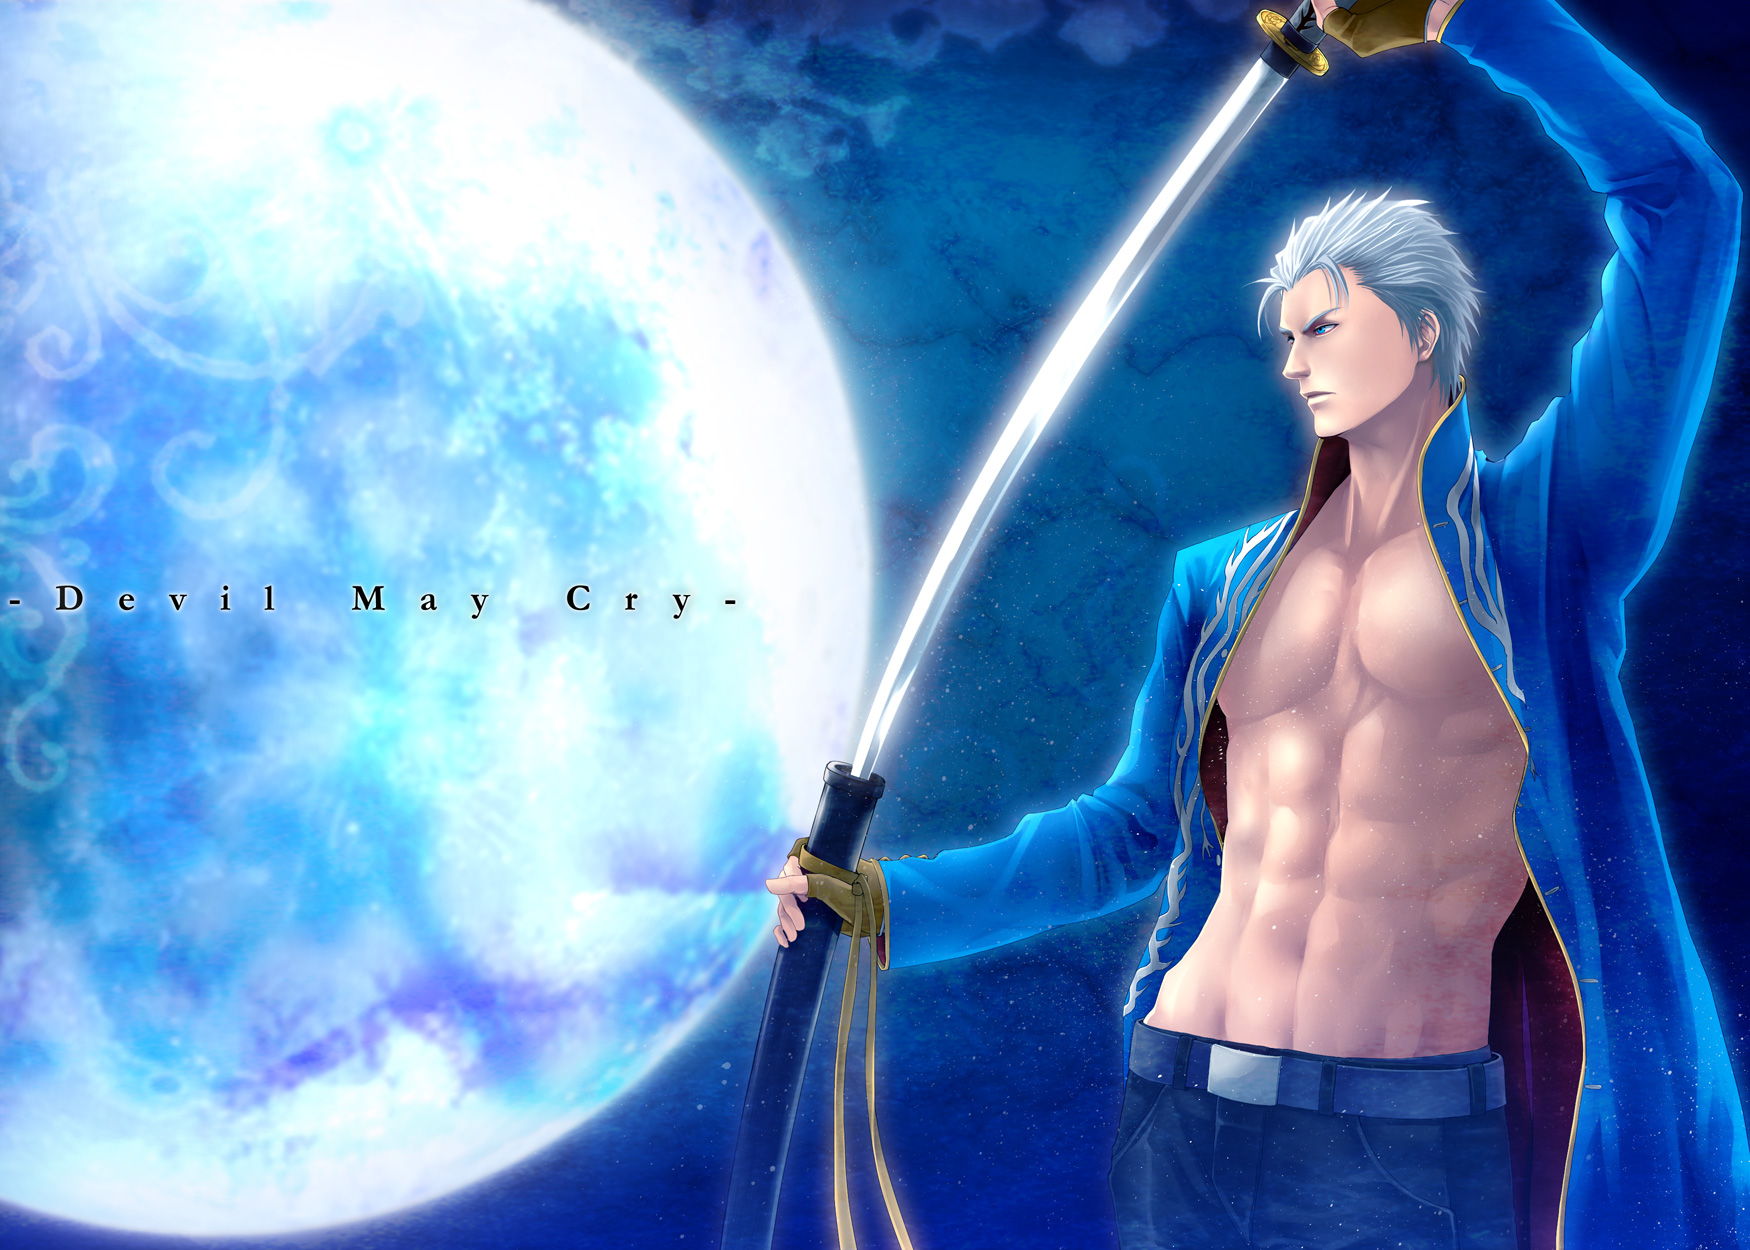 Devil May Cry Vergil wallpaper 1750x1250 122628 WallpaperUP